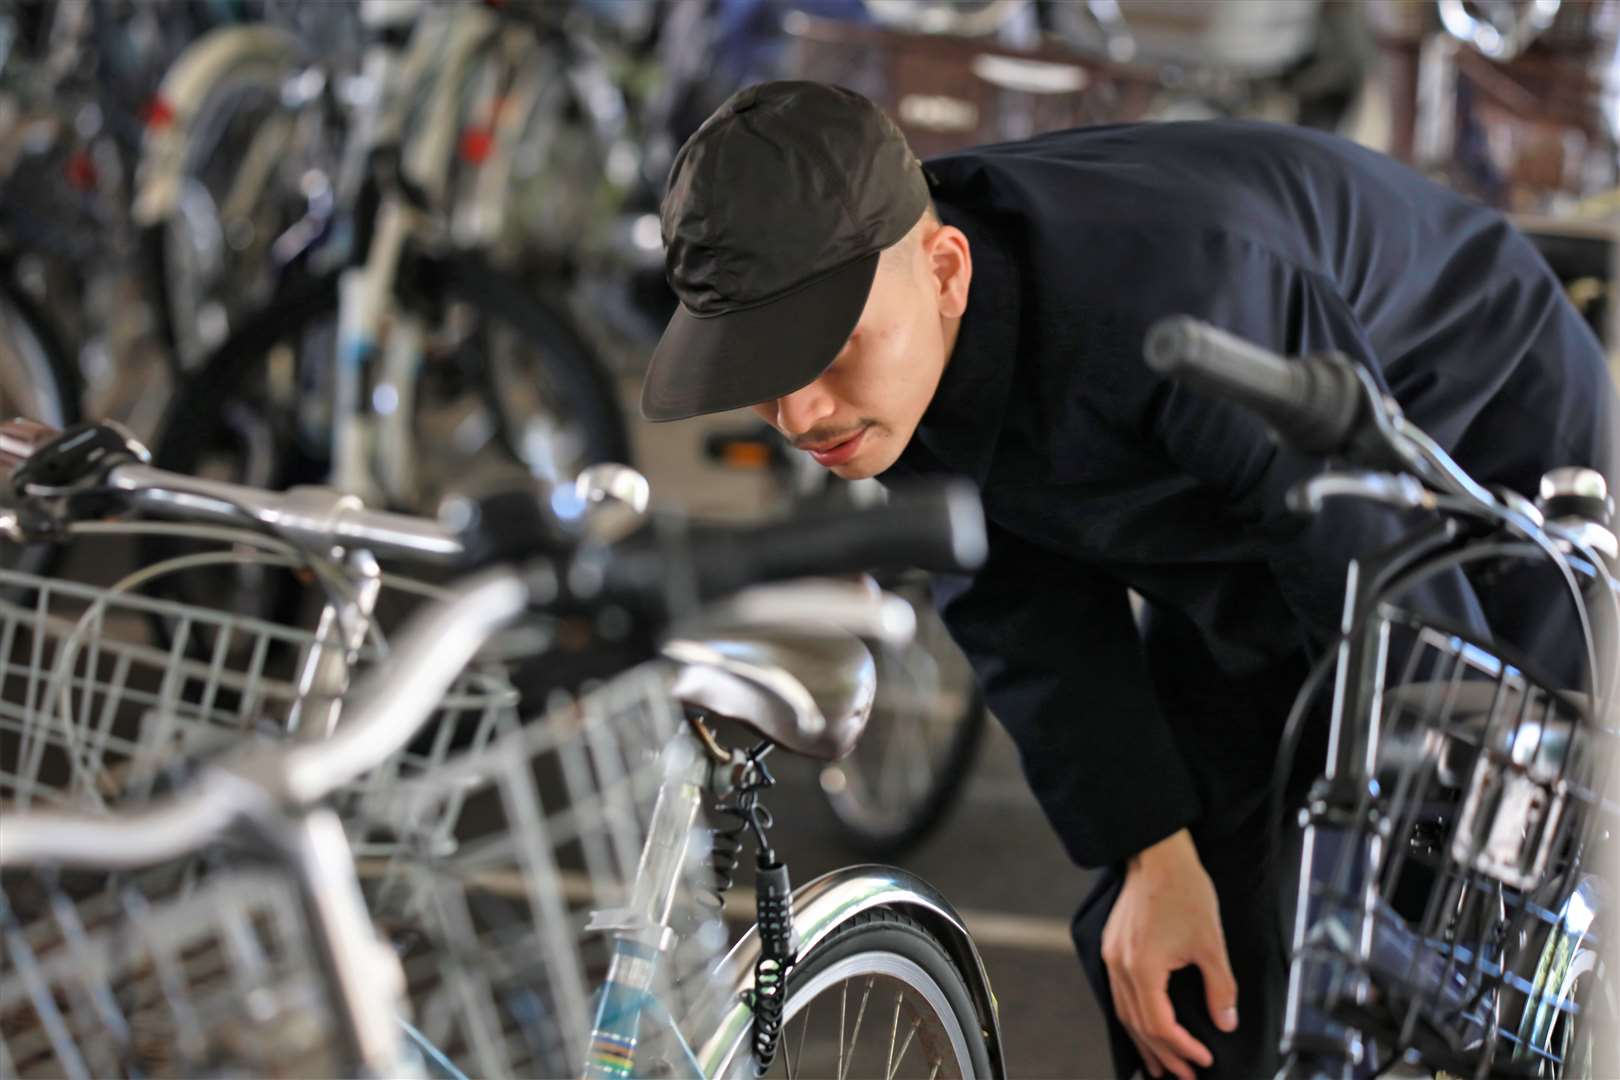 Beware – thieves are on the prowl for poorly secured or unsecured bikes.